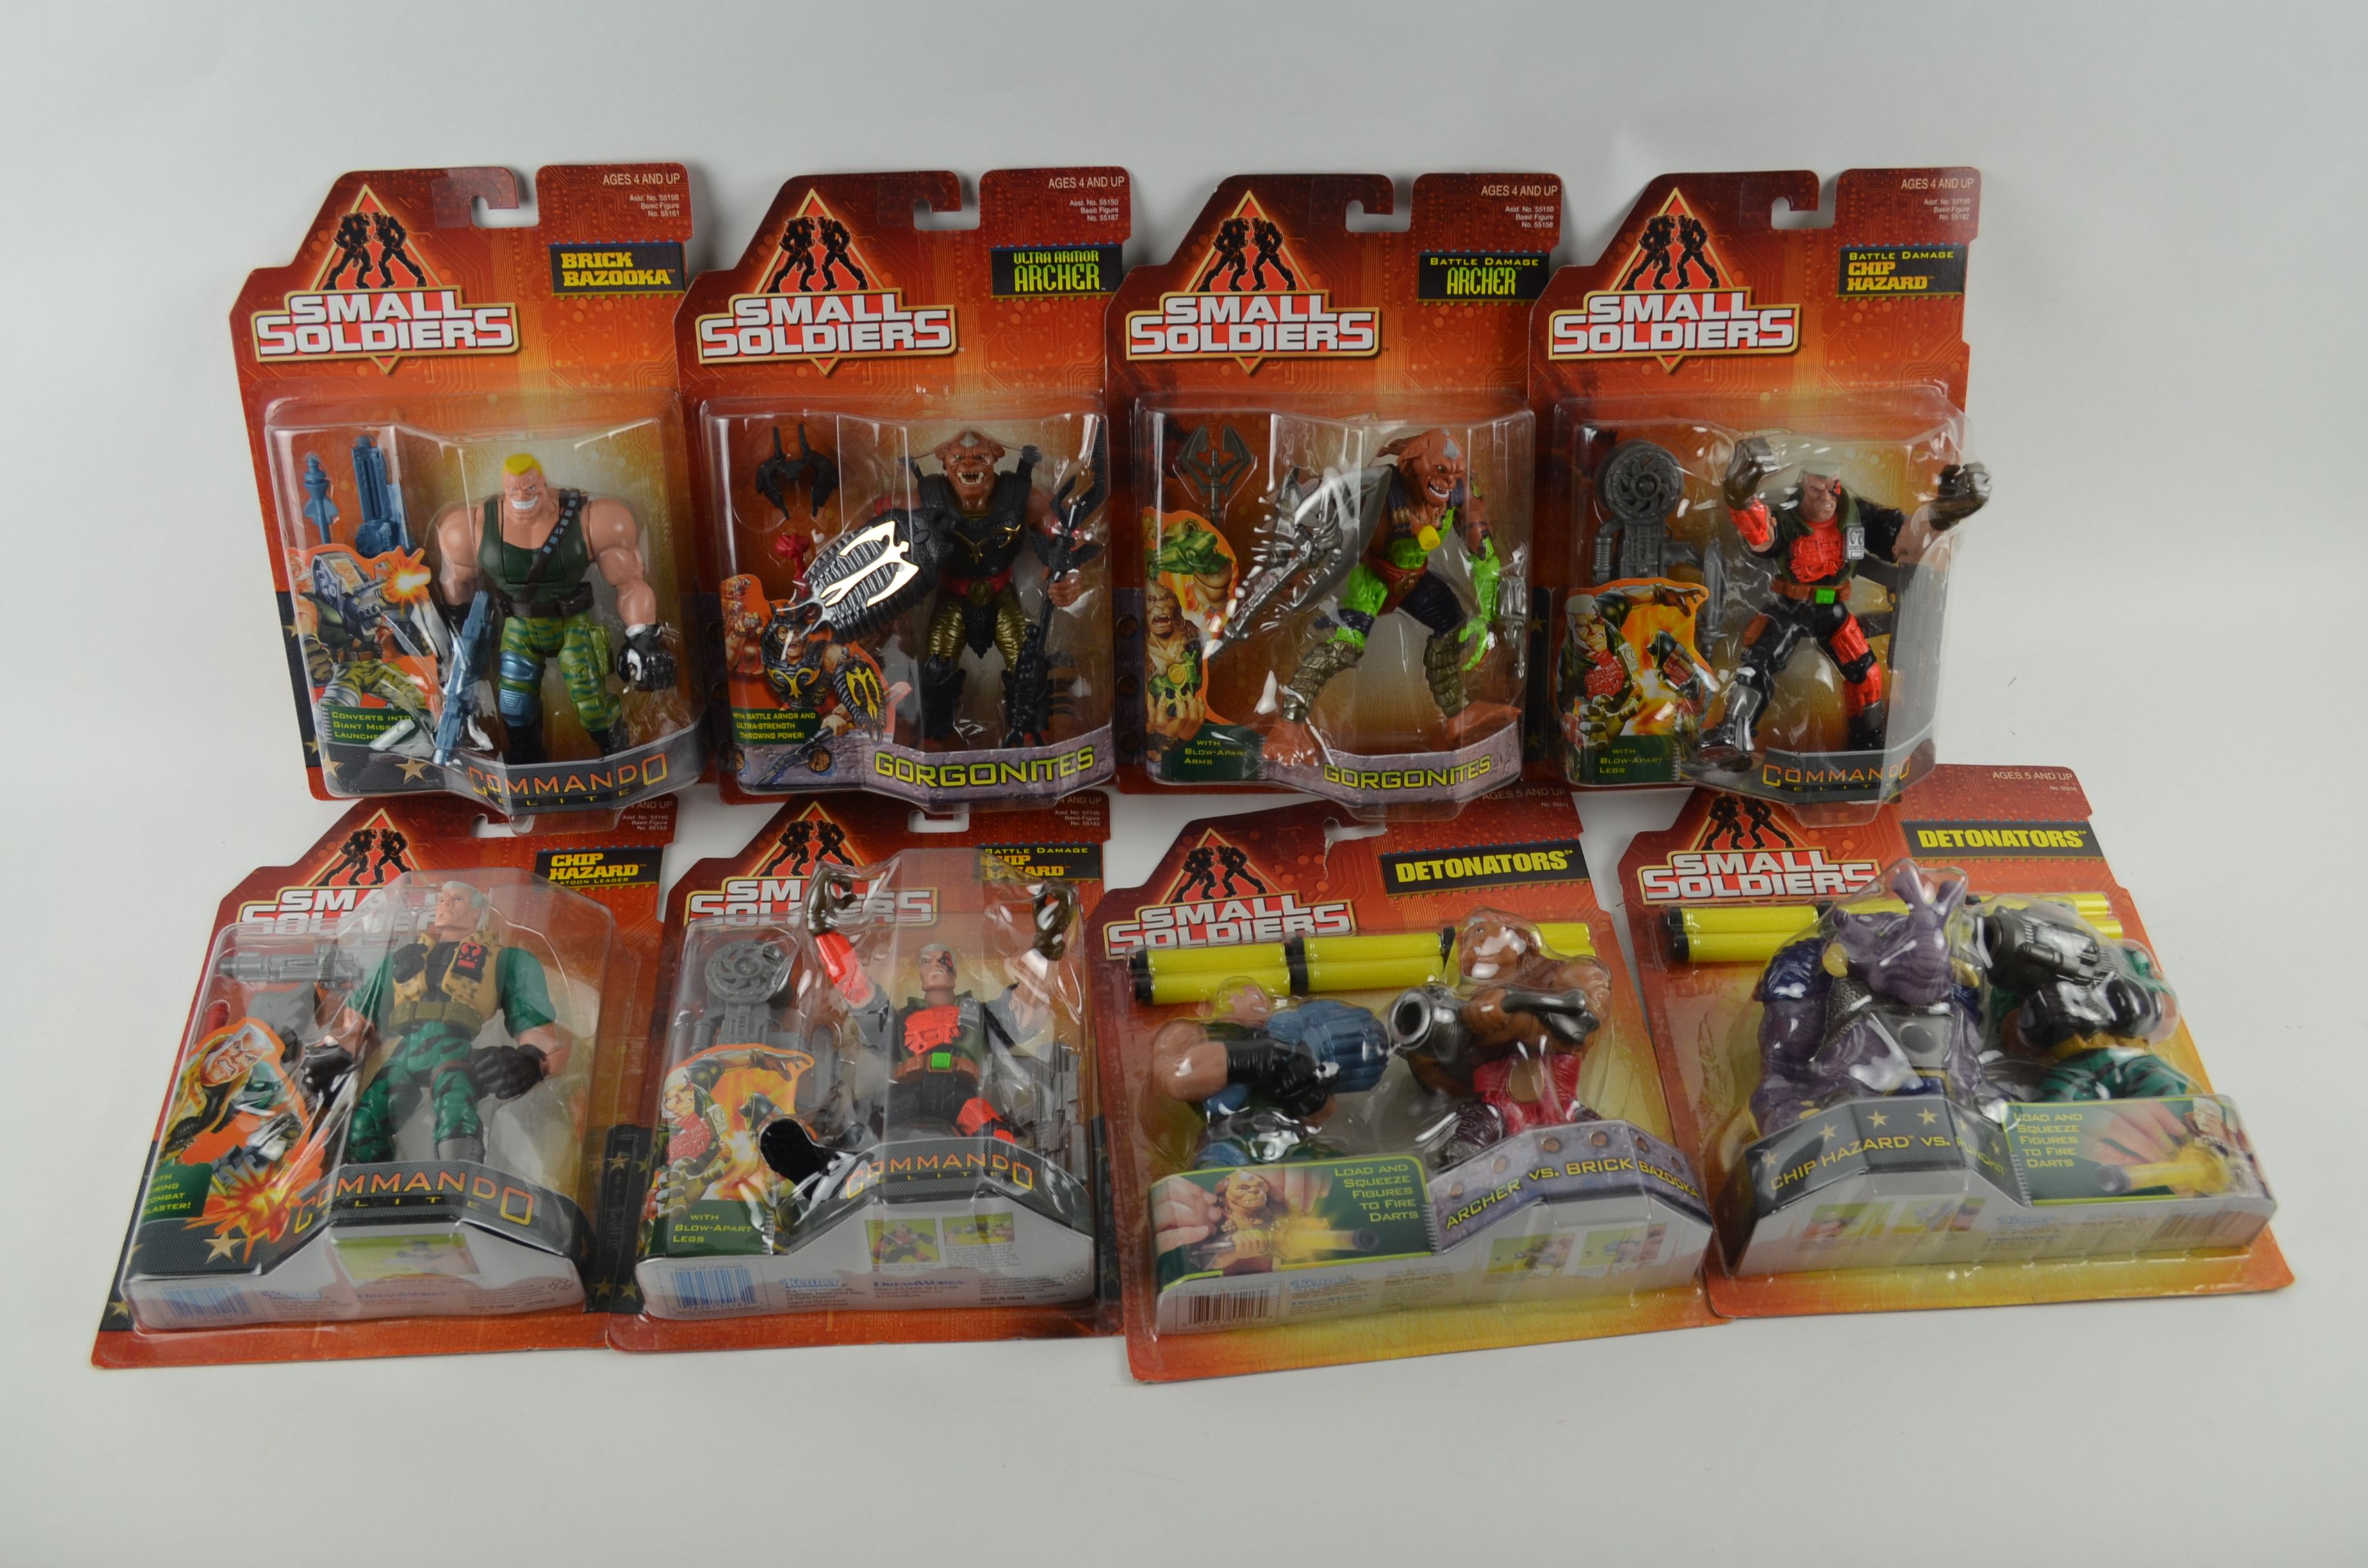 Small Soldiers Movie Toys 35